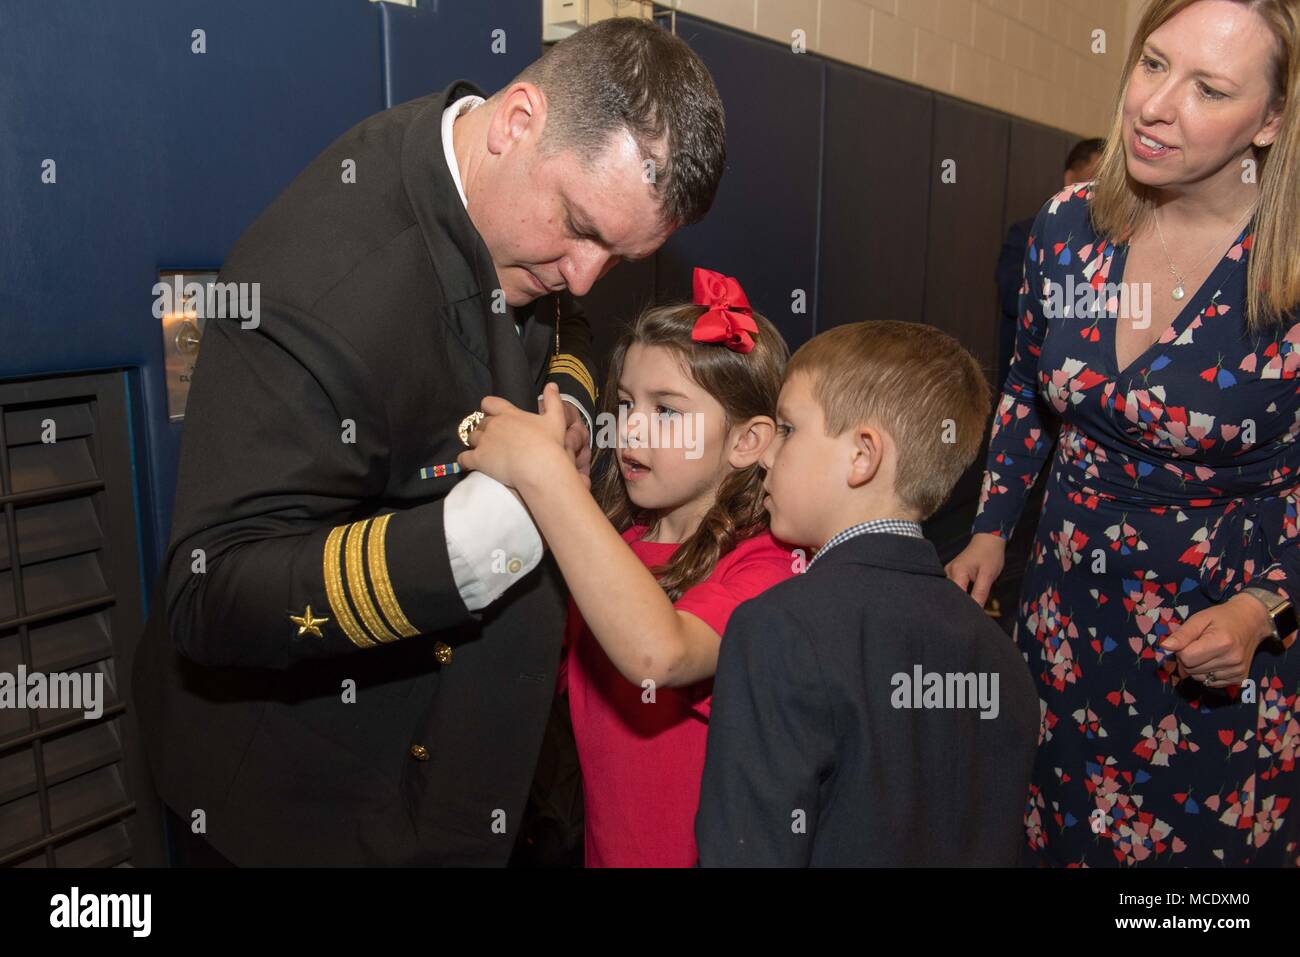 180223-N-TB148-227 CHINHAE, Republic of Korea (Feb. 23, 2018) Cmdr. Jeremy R. Ewing is pinned with his command ashore pin by his children during a change-of-command ceremony for Commander, Fleet Activities Chinhae (CFAC). During the ceremony, Ewing relieved Cmdr. Terry P. McNamara, becoming CFAC's 18th commander. (U.S. Navy photo by Mass Communication Specialist Seaman William Carlisle) Stock Photo